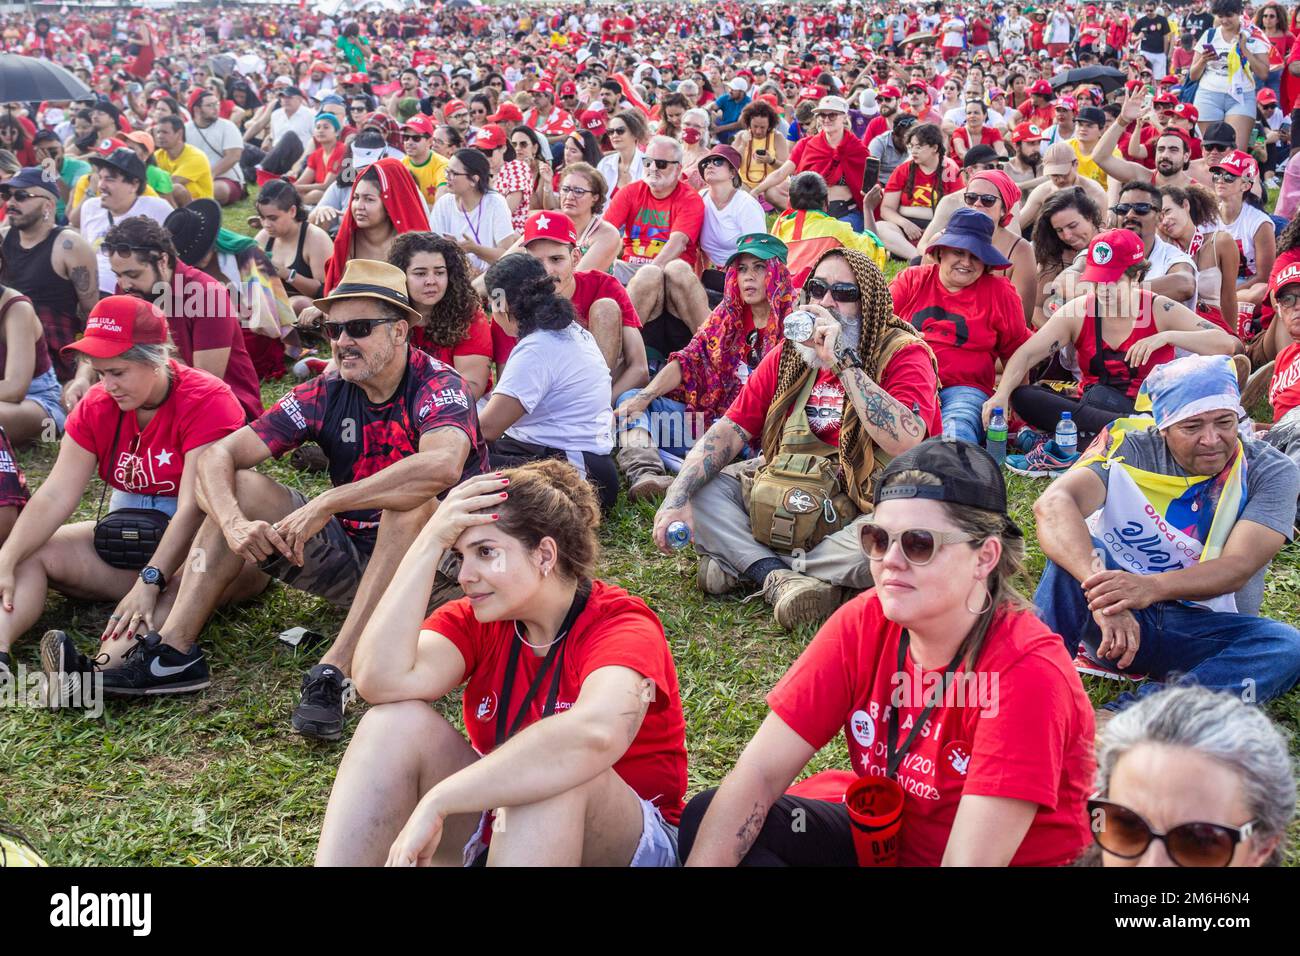 Brasília, DF, Brazil – January 01, 2023: The crowd listening to the speech at the inauguration event of the president-elect of Brazil, Lula. Stock Photo